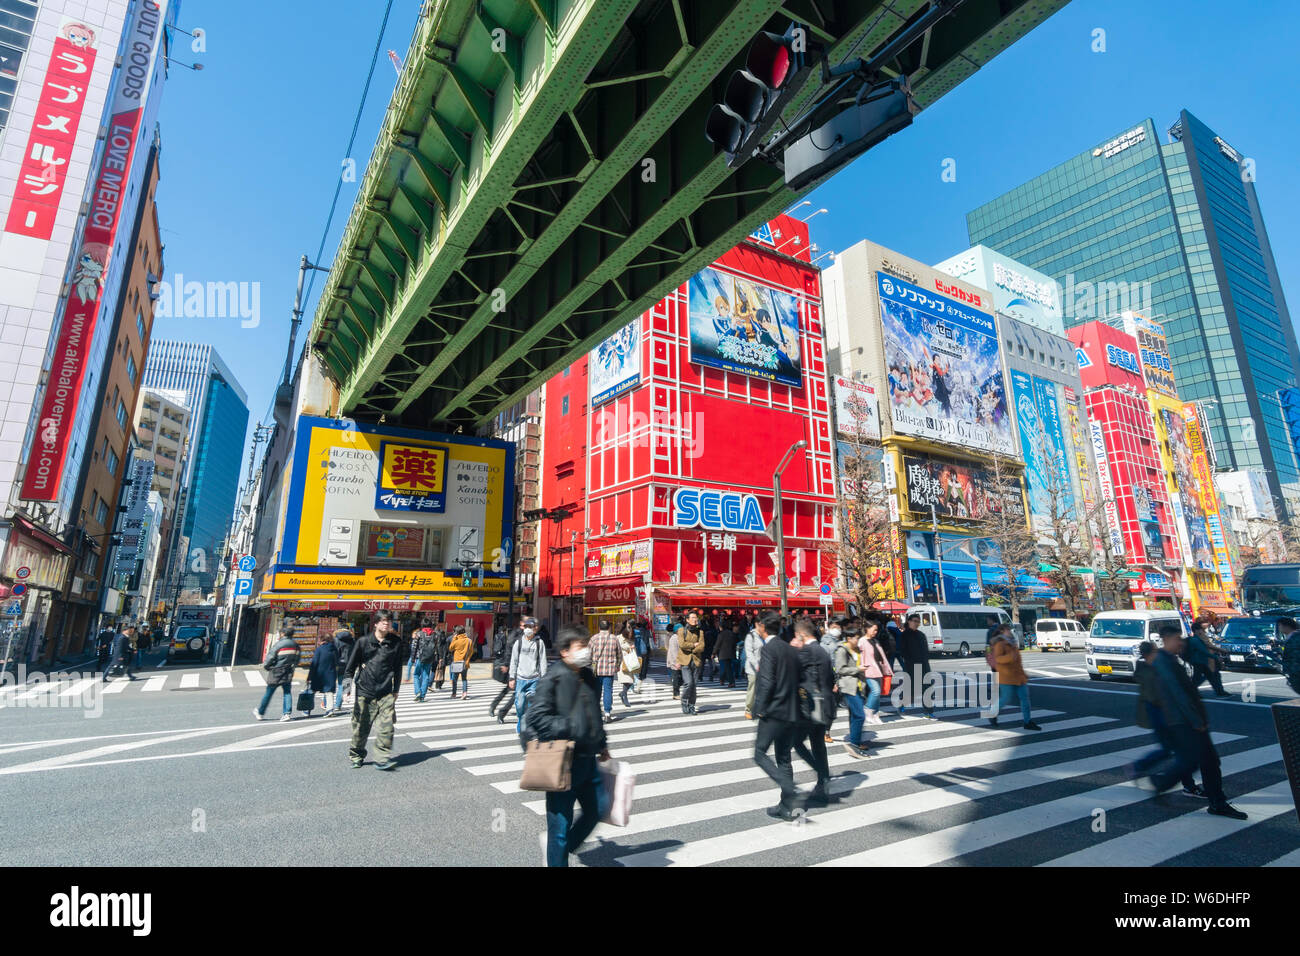 Tokyo, Japan - Mar 18, 2019: People visiting Akihabara in Tokyo. It is a shopping district for video games, anime, comics and computer goods. Stock Photo